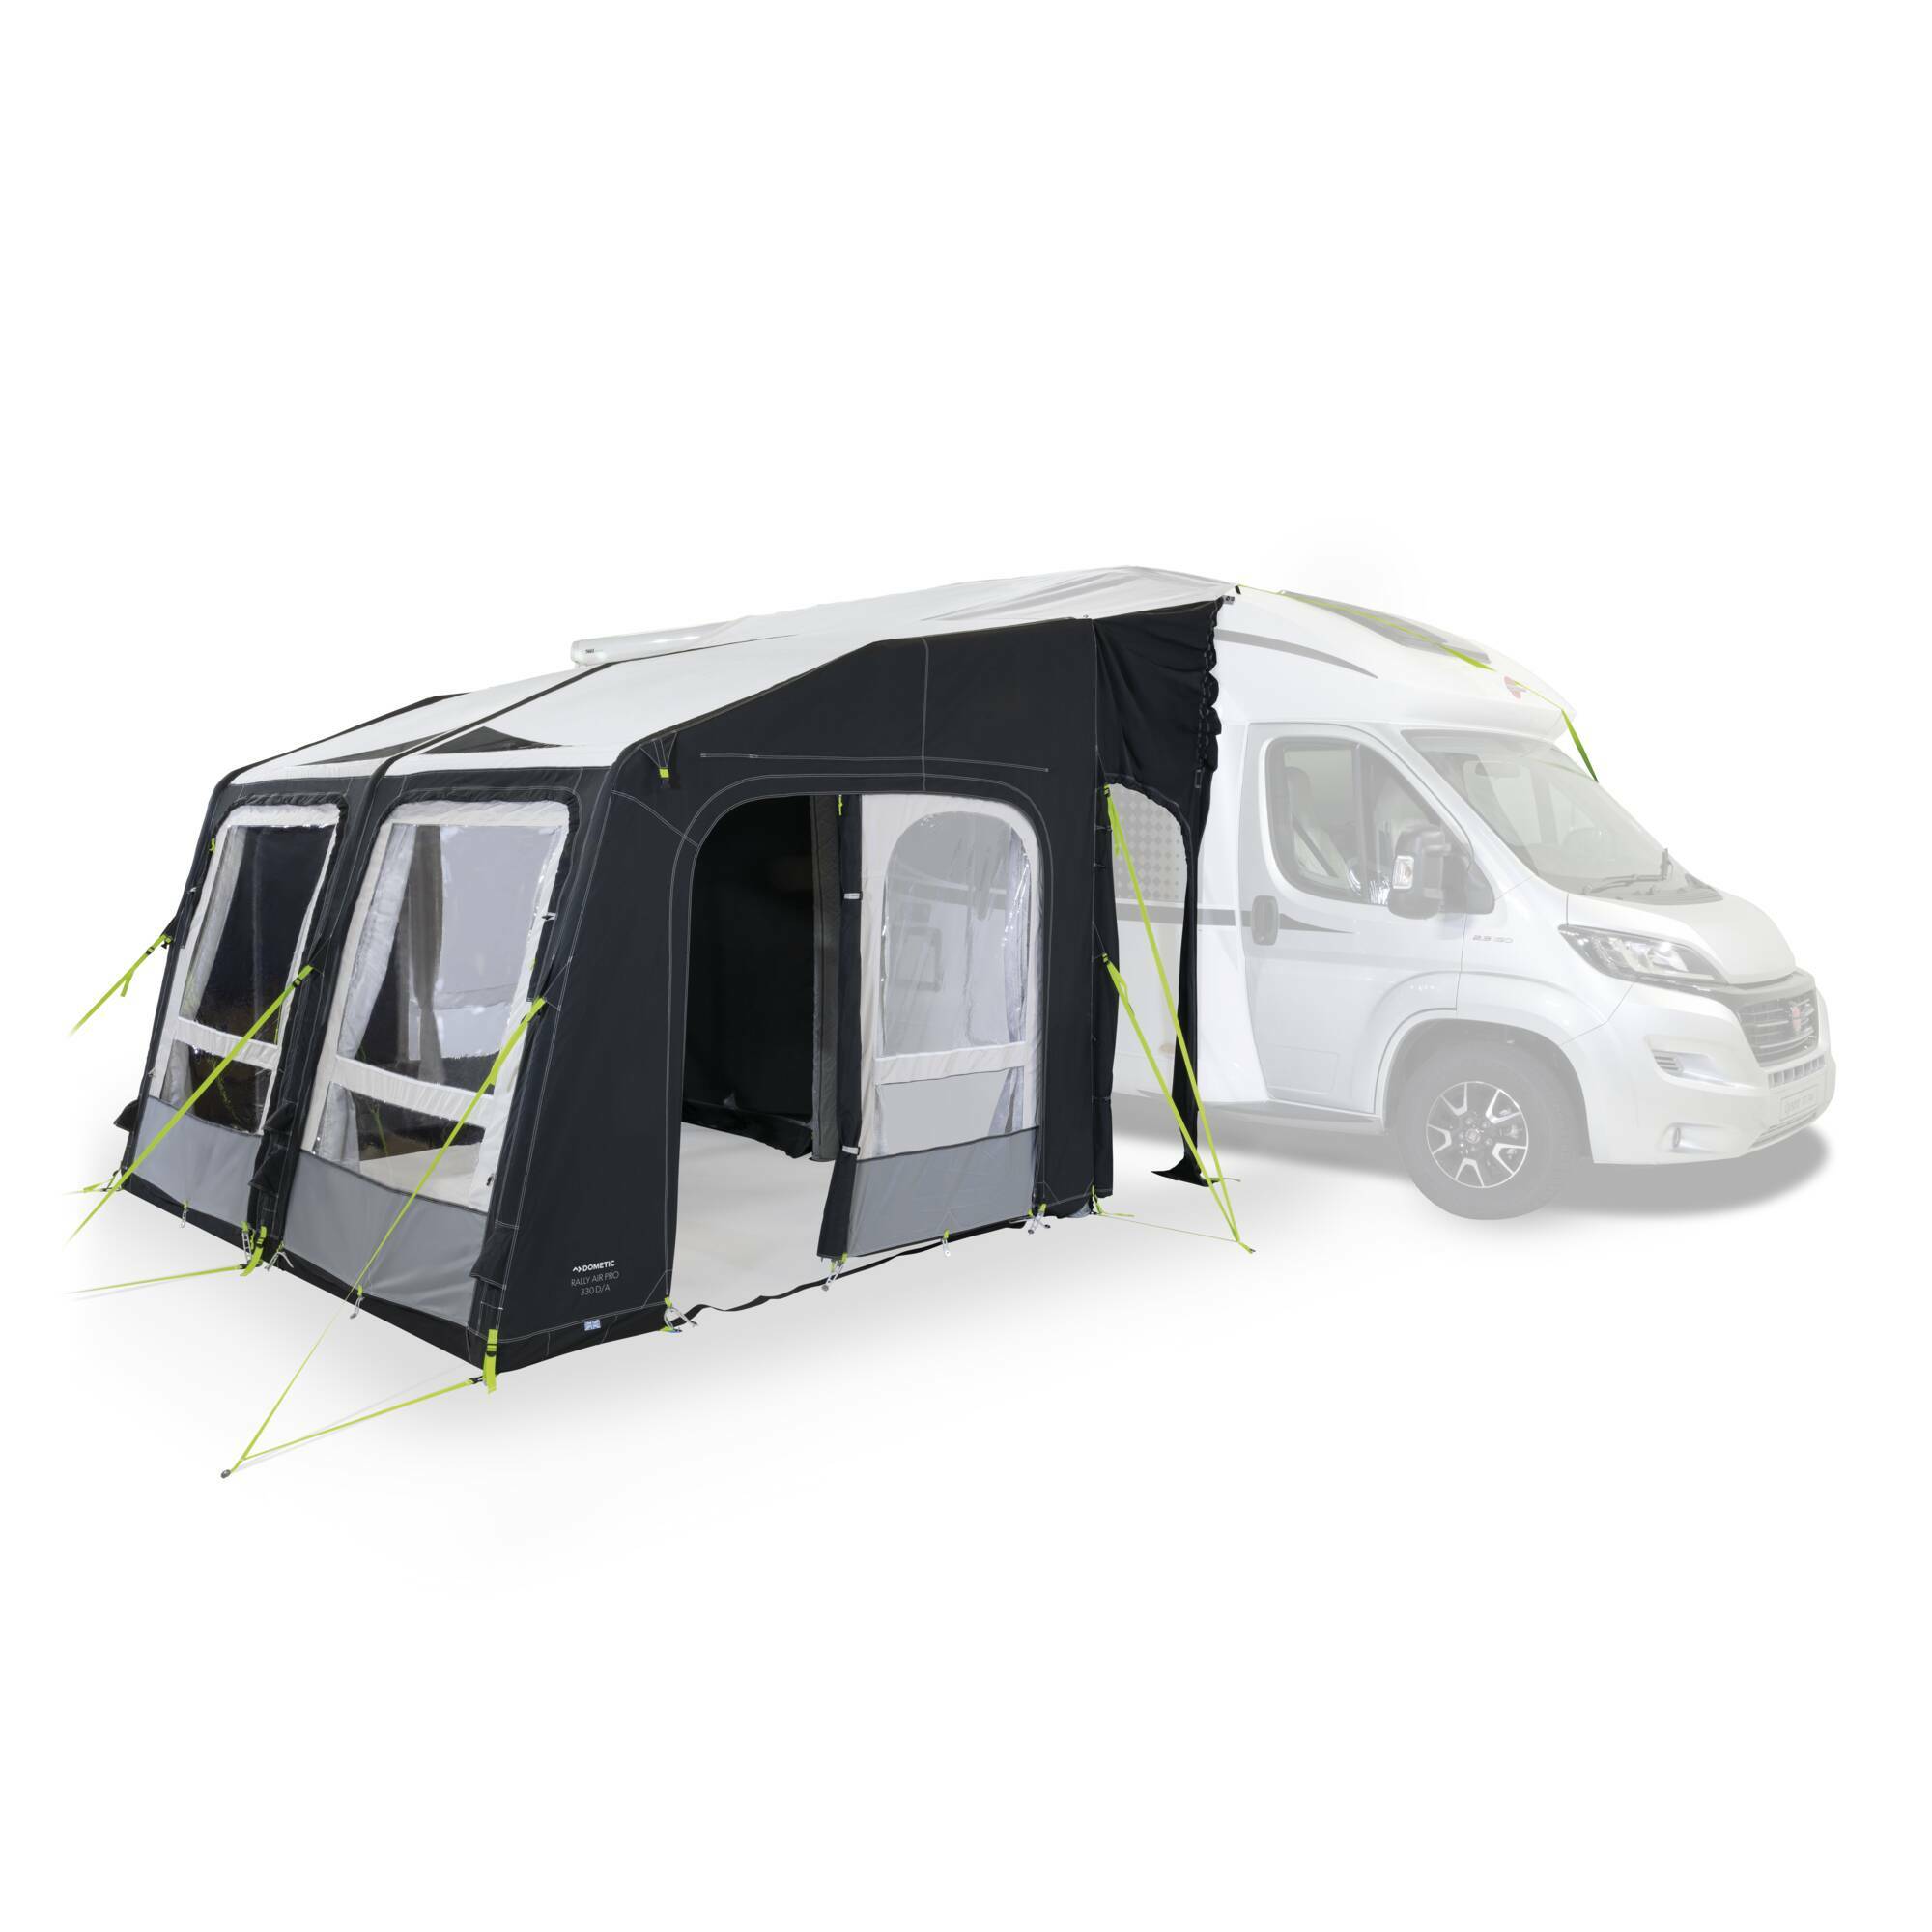 Dometic Rally 330 Driveaway Awning